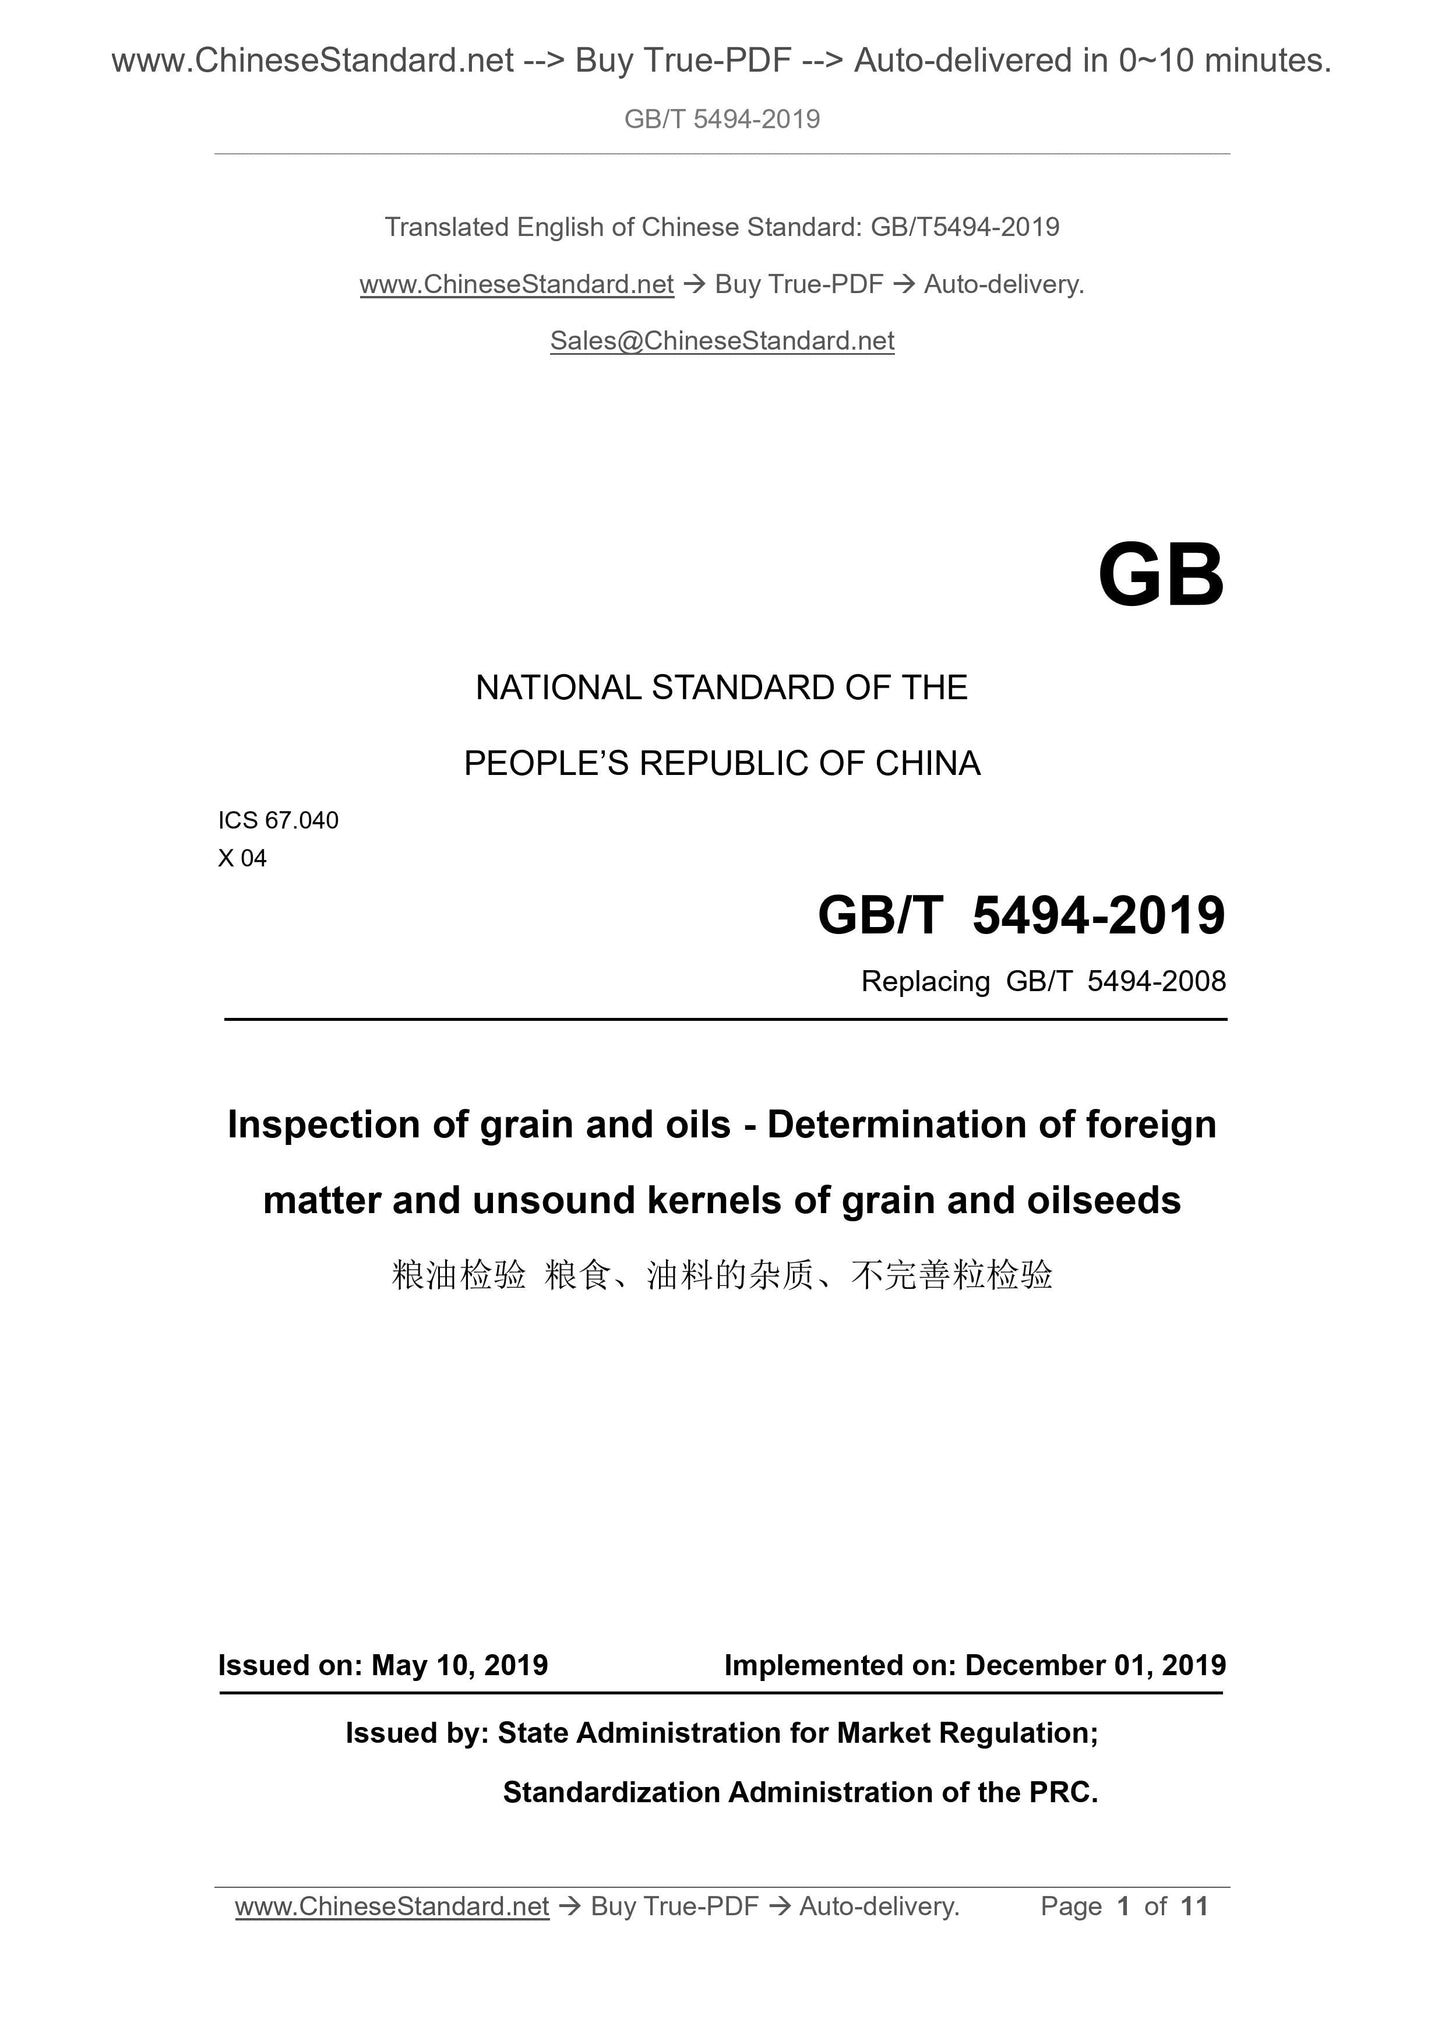 GB/T 5494-2019 Page 1